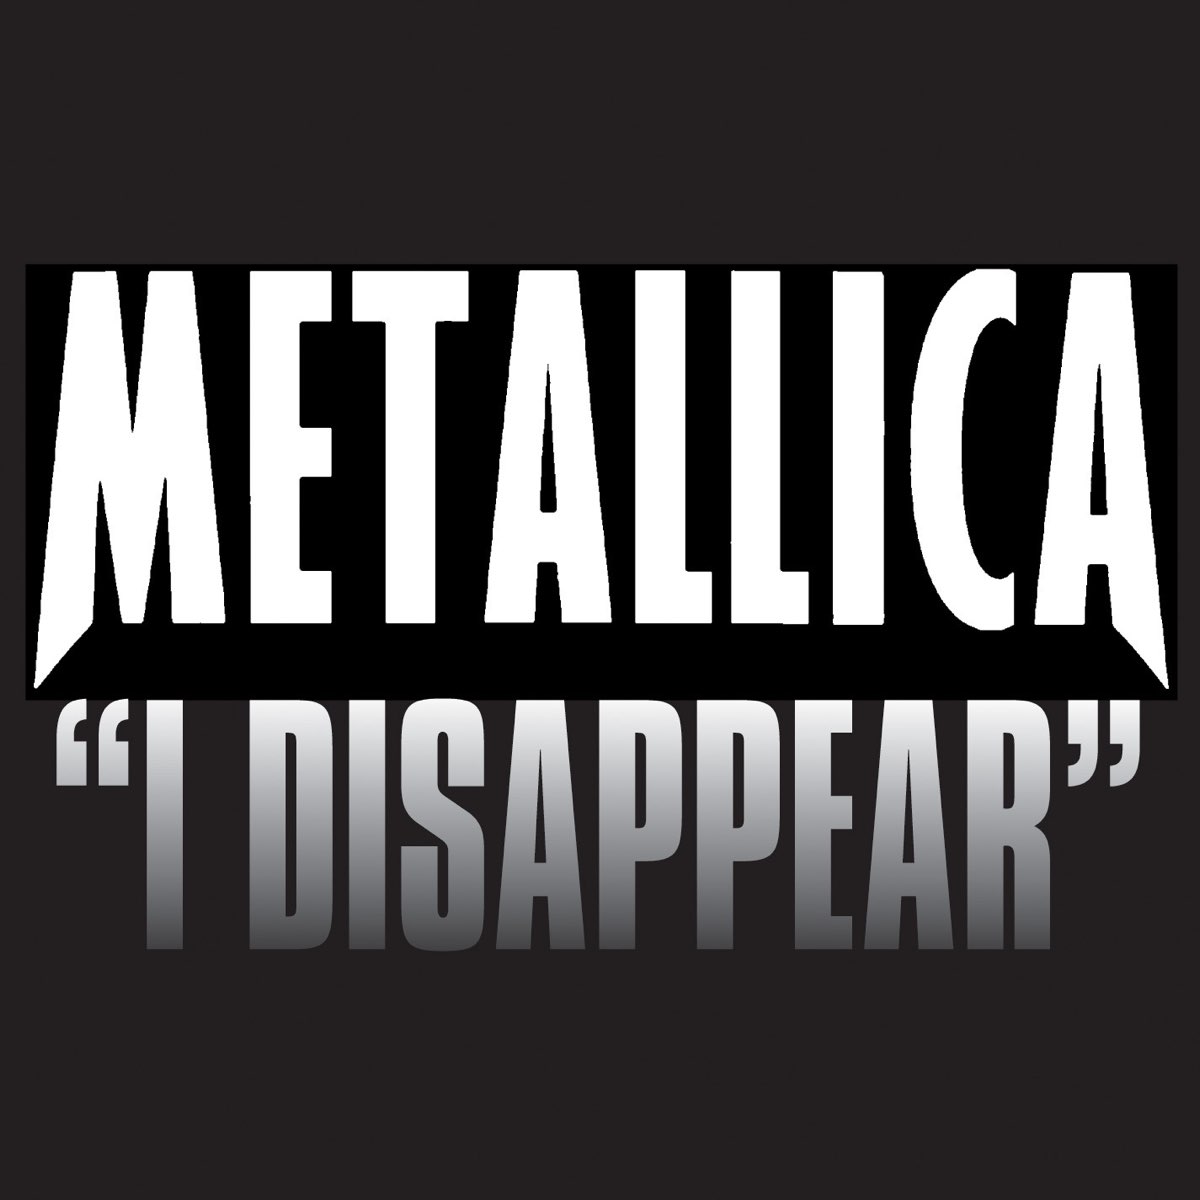 Metallica i disappear. Metallica disappear. Металлика дисапир. I disappear. Metallica i disappear обложка.